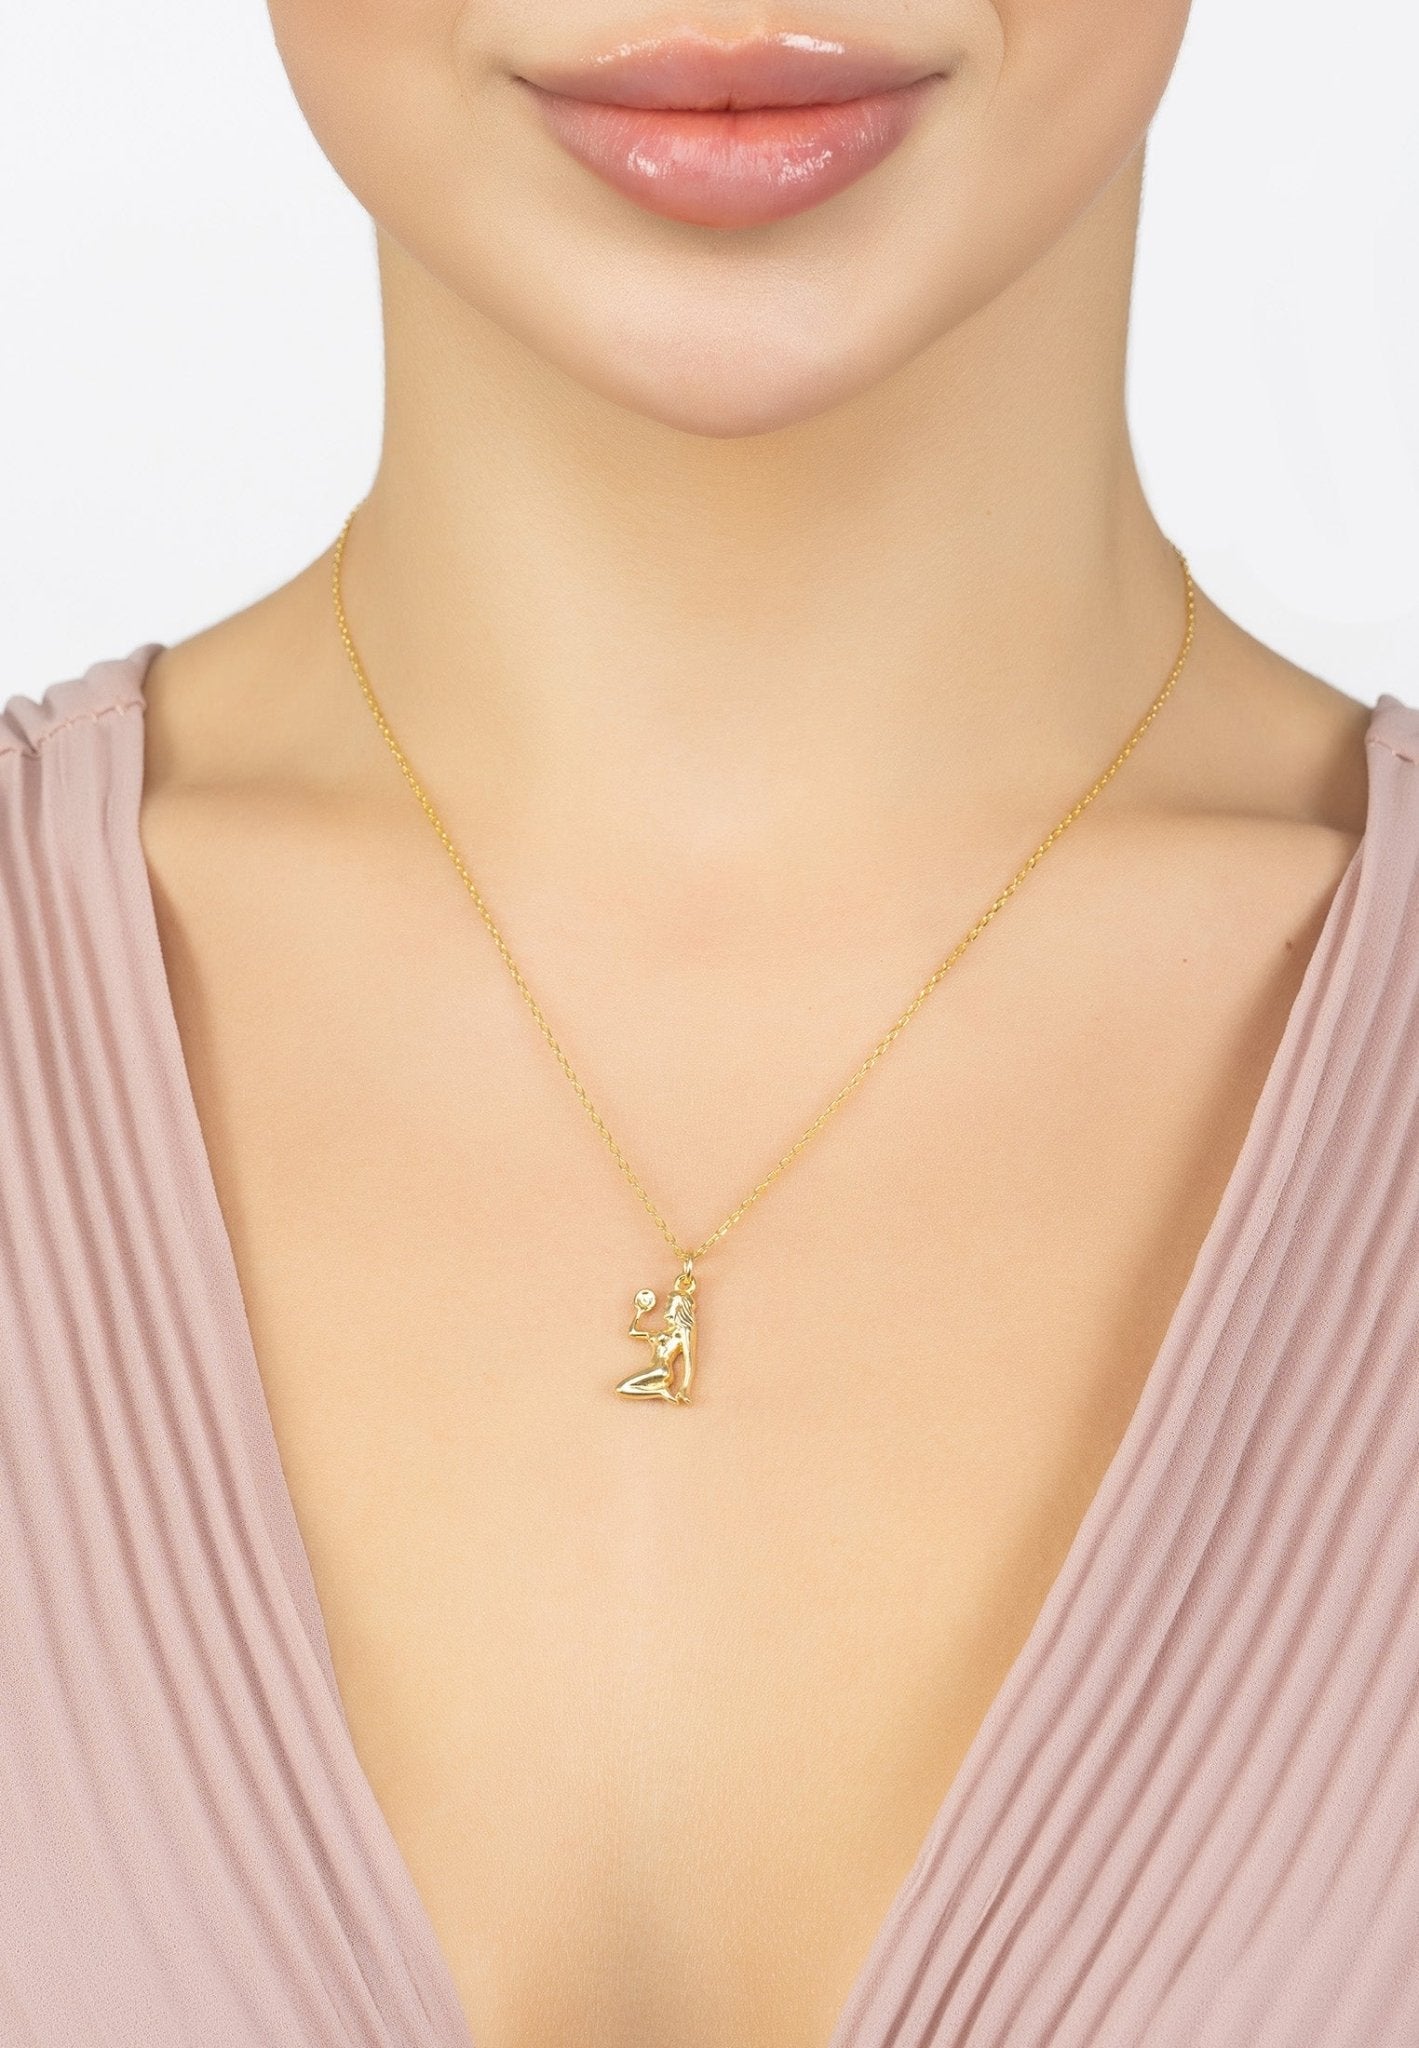 Personalized Necklaces - Zodiac Star Sign Necklace Gold Virgo 